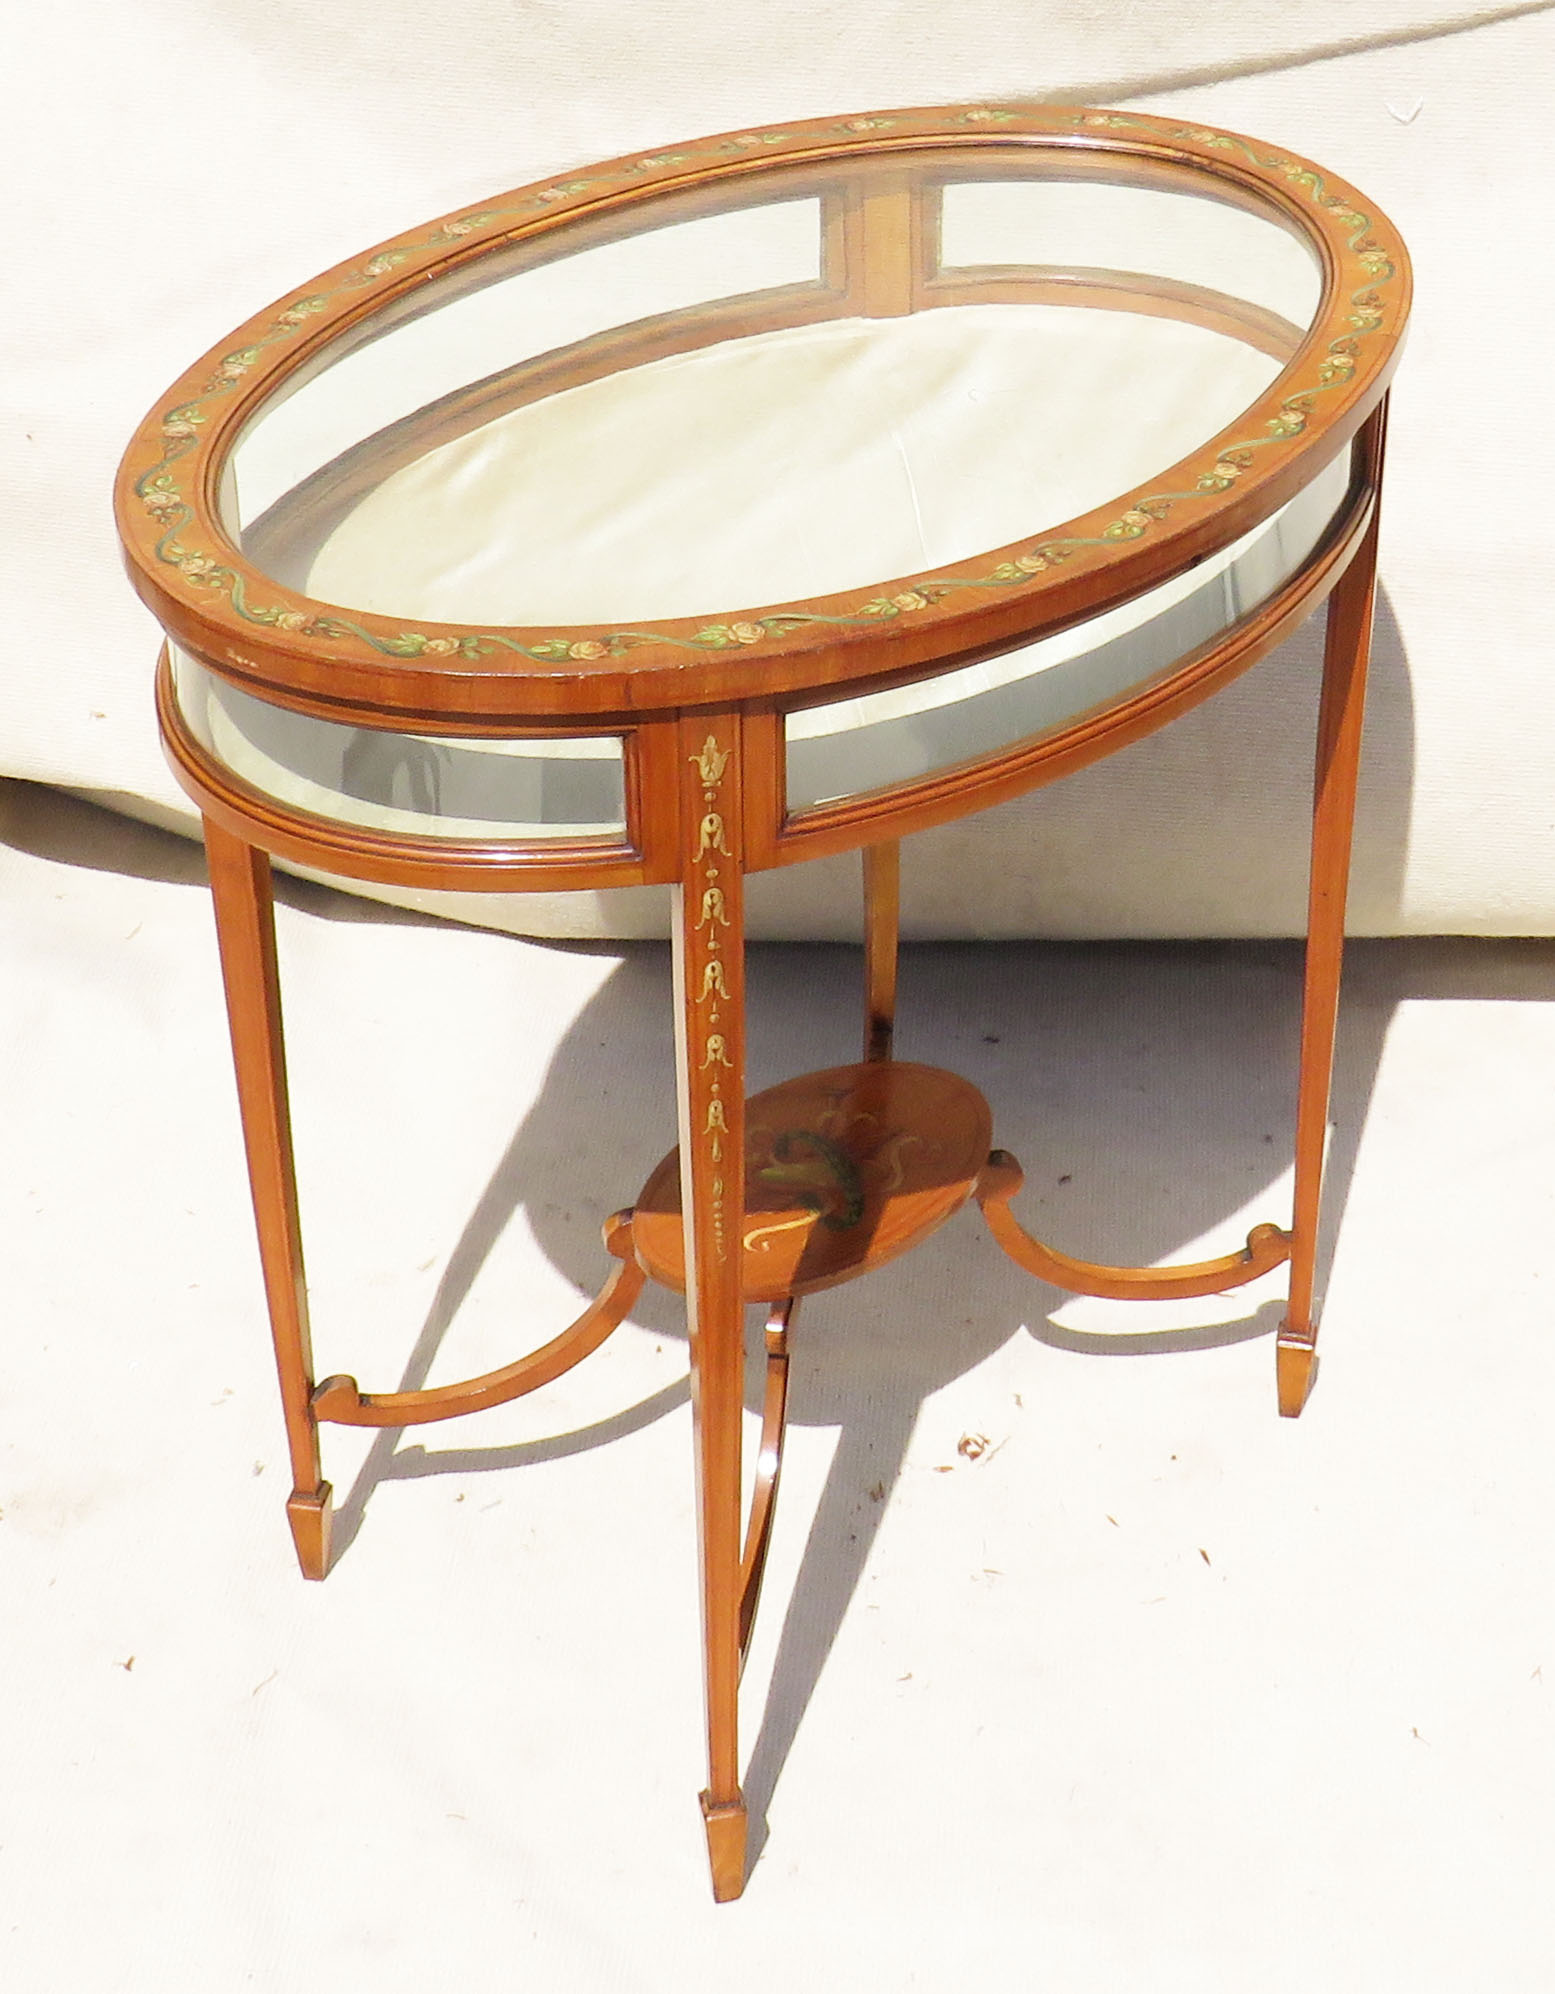 Late 19th Century satinwood oval bijouterie display table with painted & polychrome decoration, - Image 2 of 6